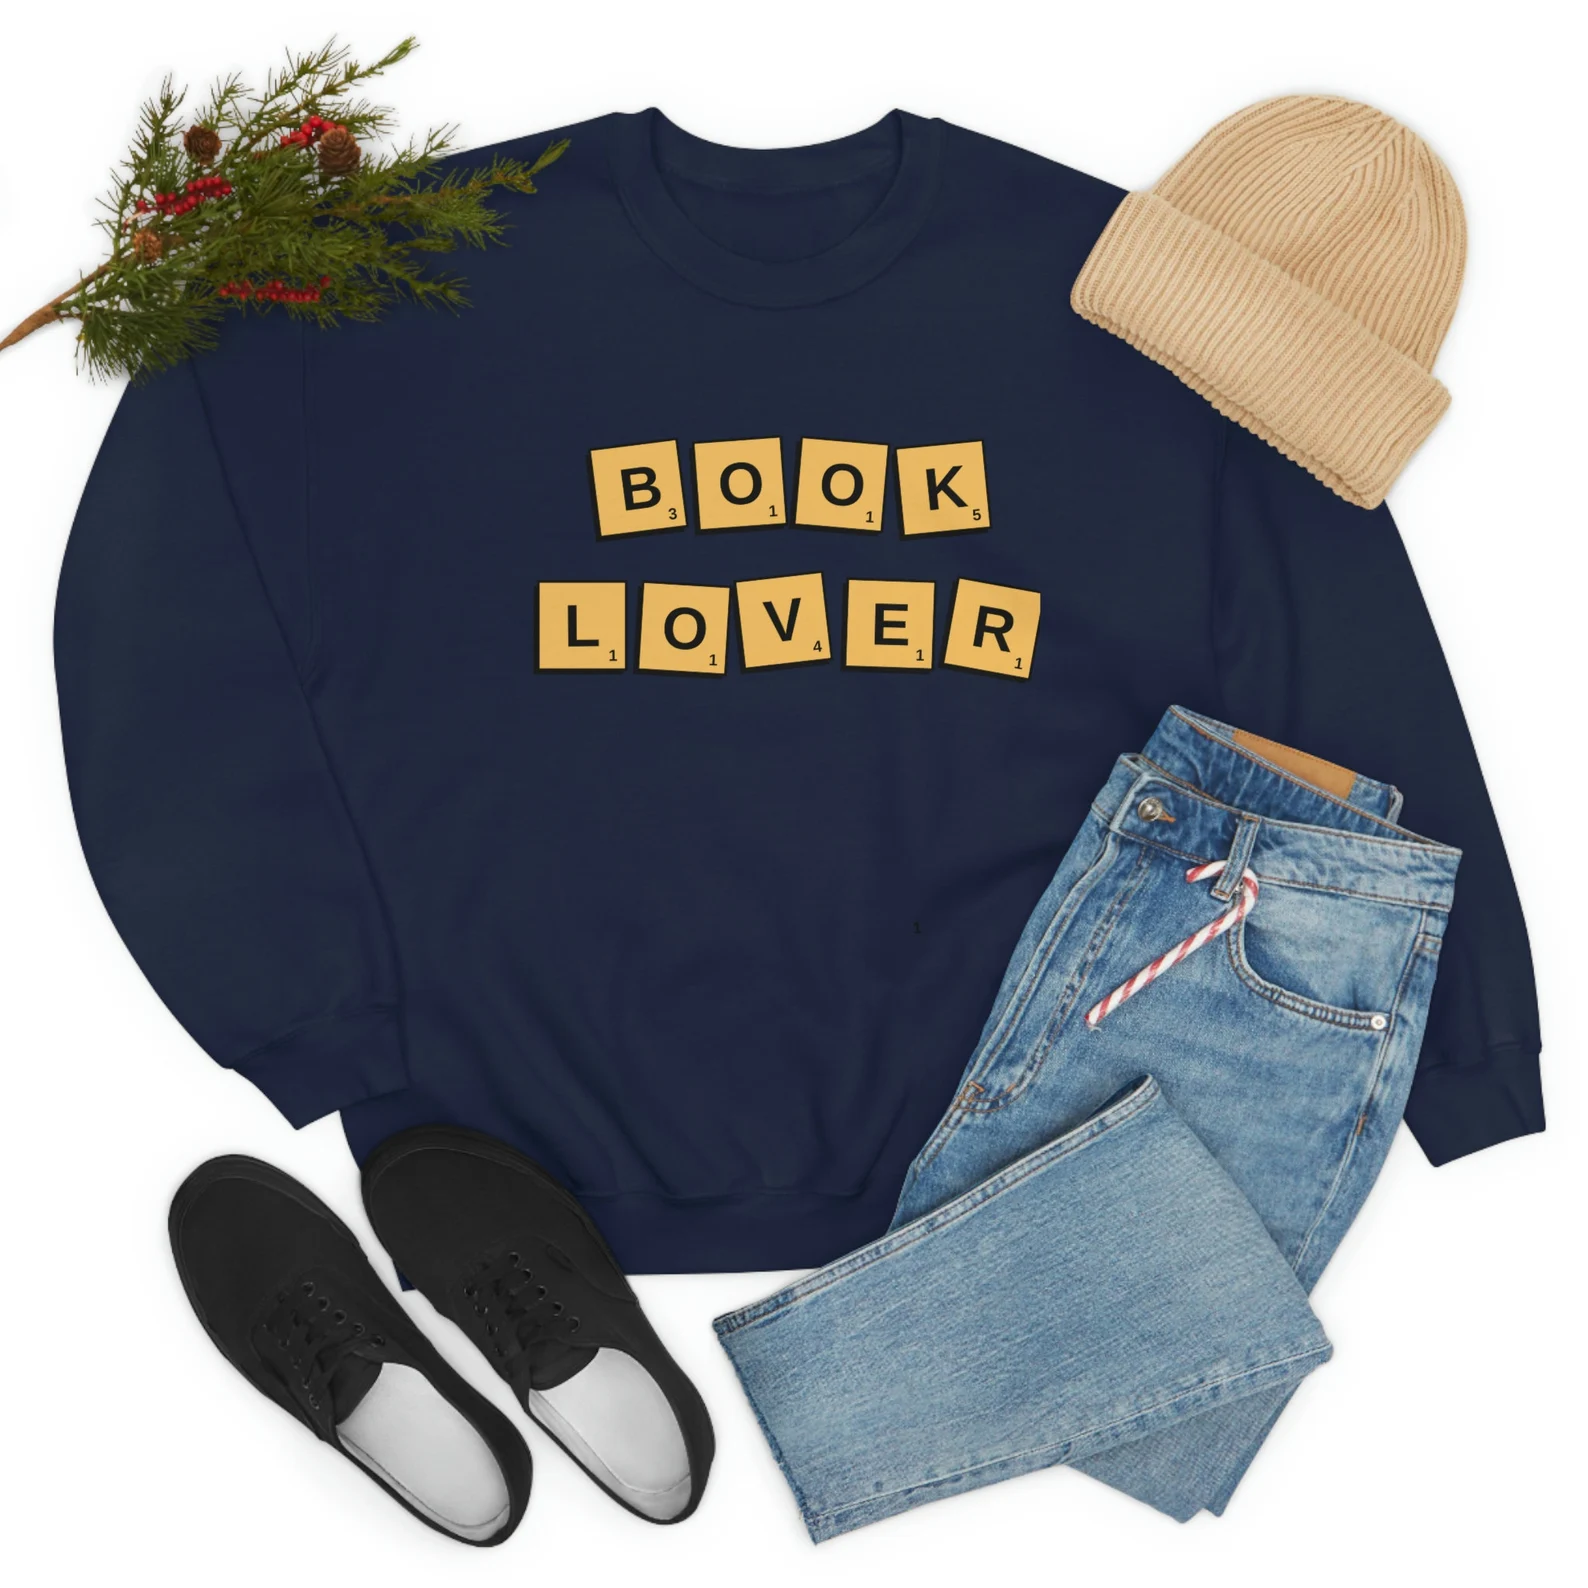 Image of a navy sweatshirt with Scrabble style letters spelling out "book lover."